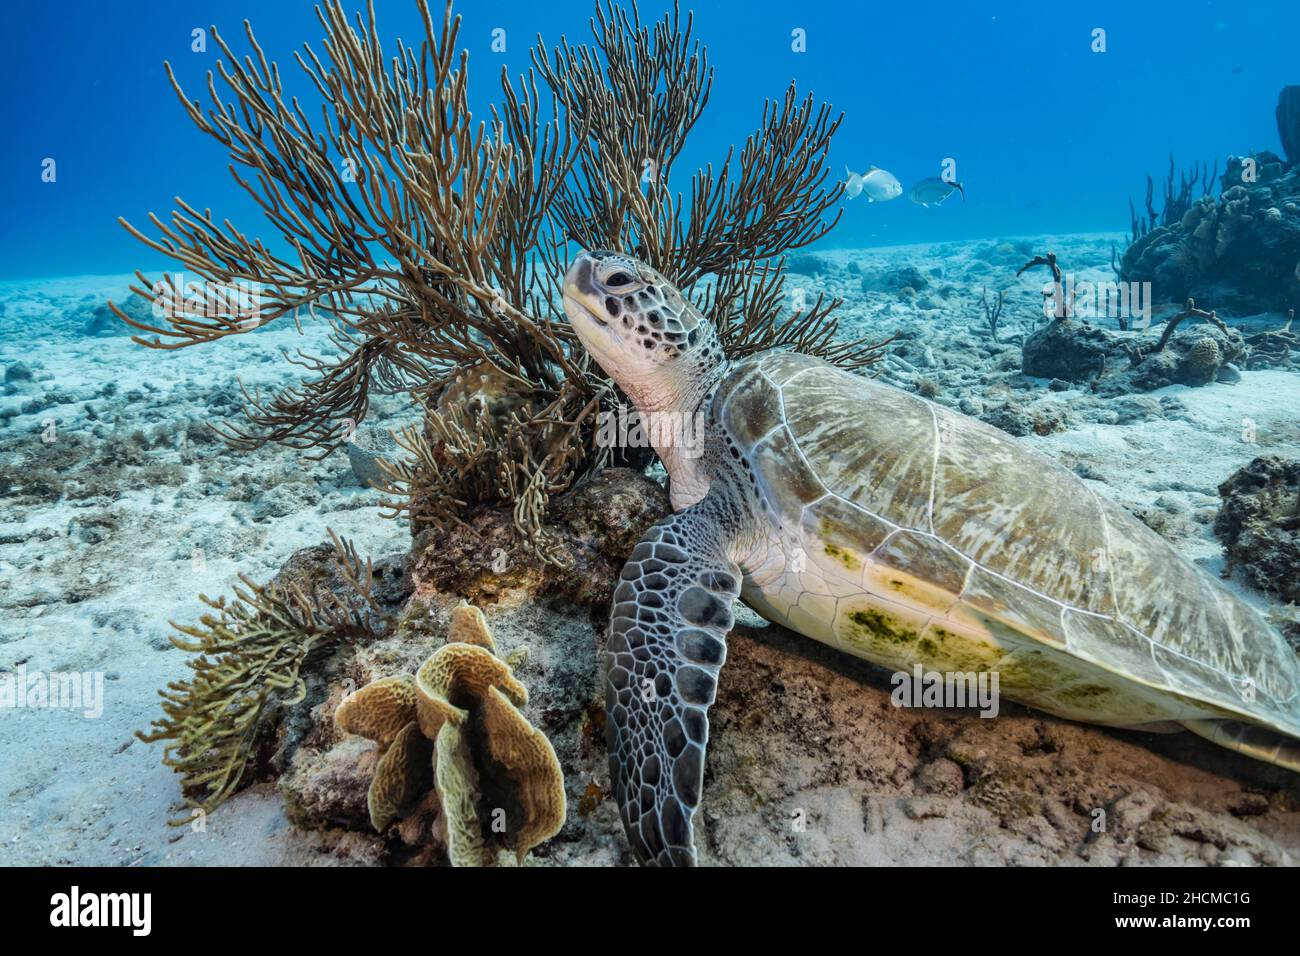 Seascape with Green Sea Turtle in the coral reef of Caribbean Sea, Curacao Stock Photo